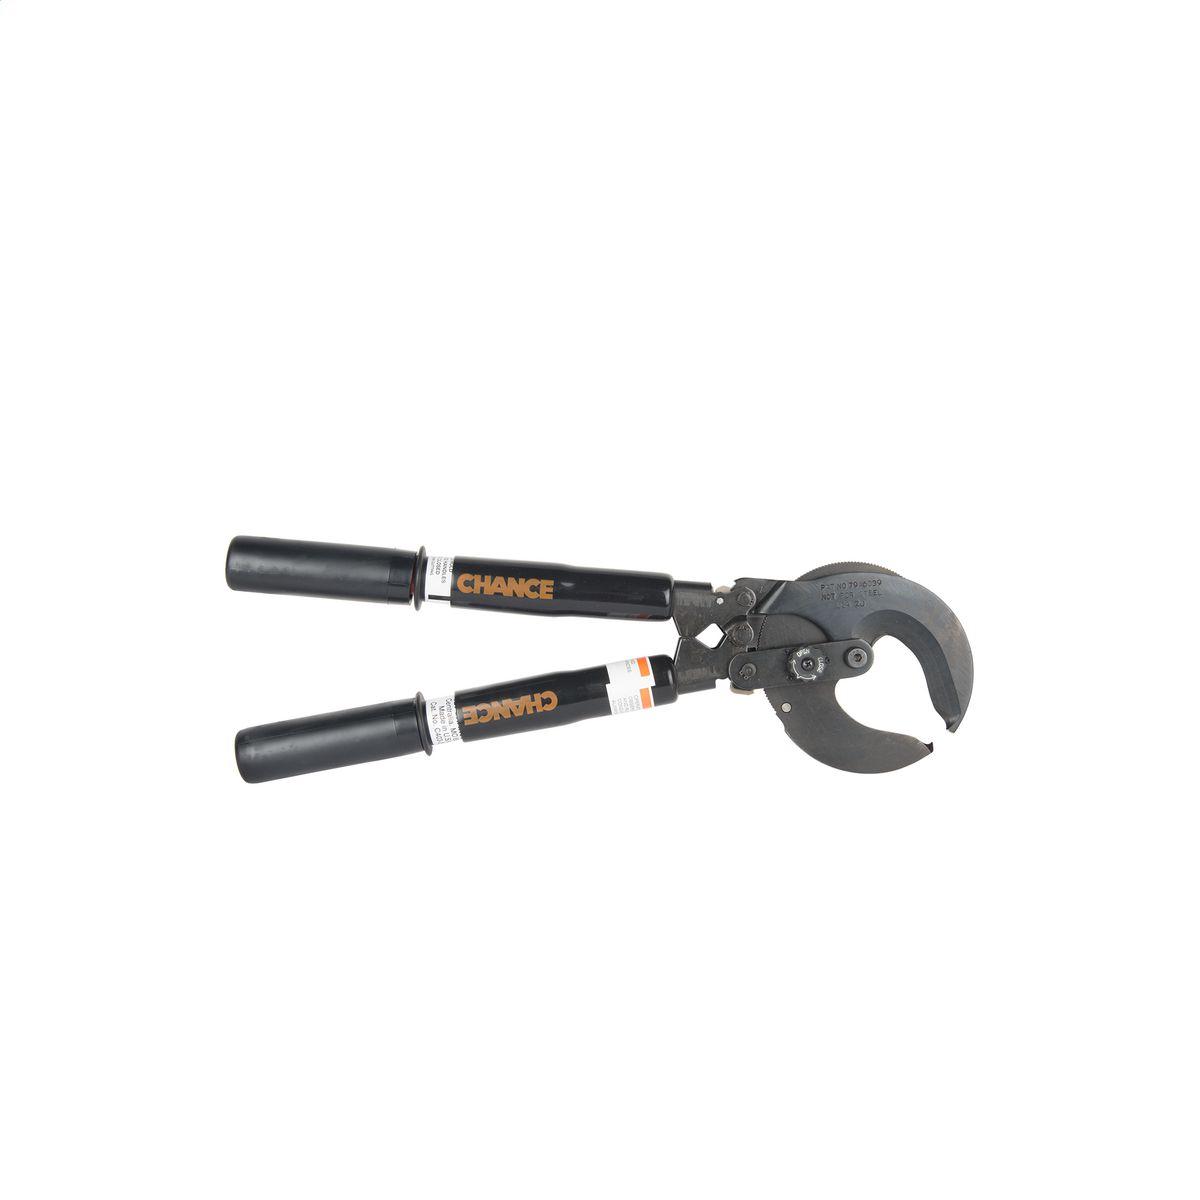 Ratcheting Cable Cutter For All-Uluminum Or Copper Up To 1000 kcmil Max